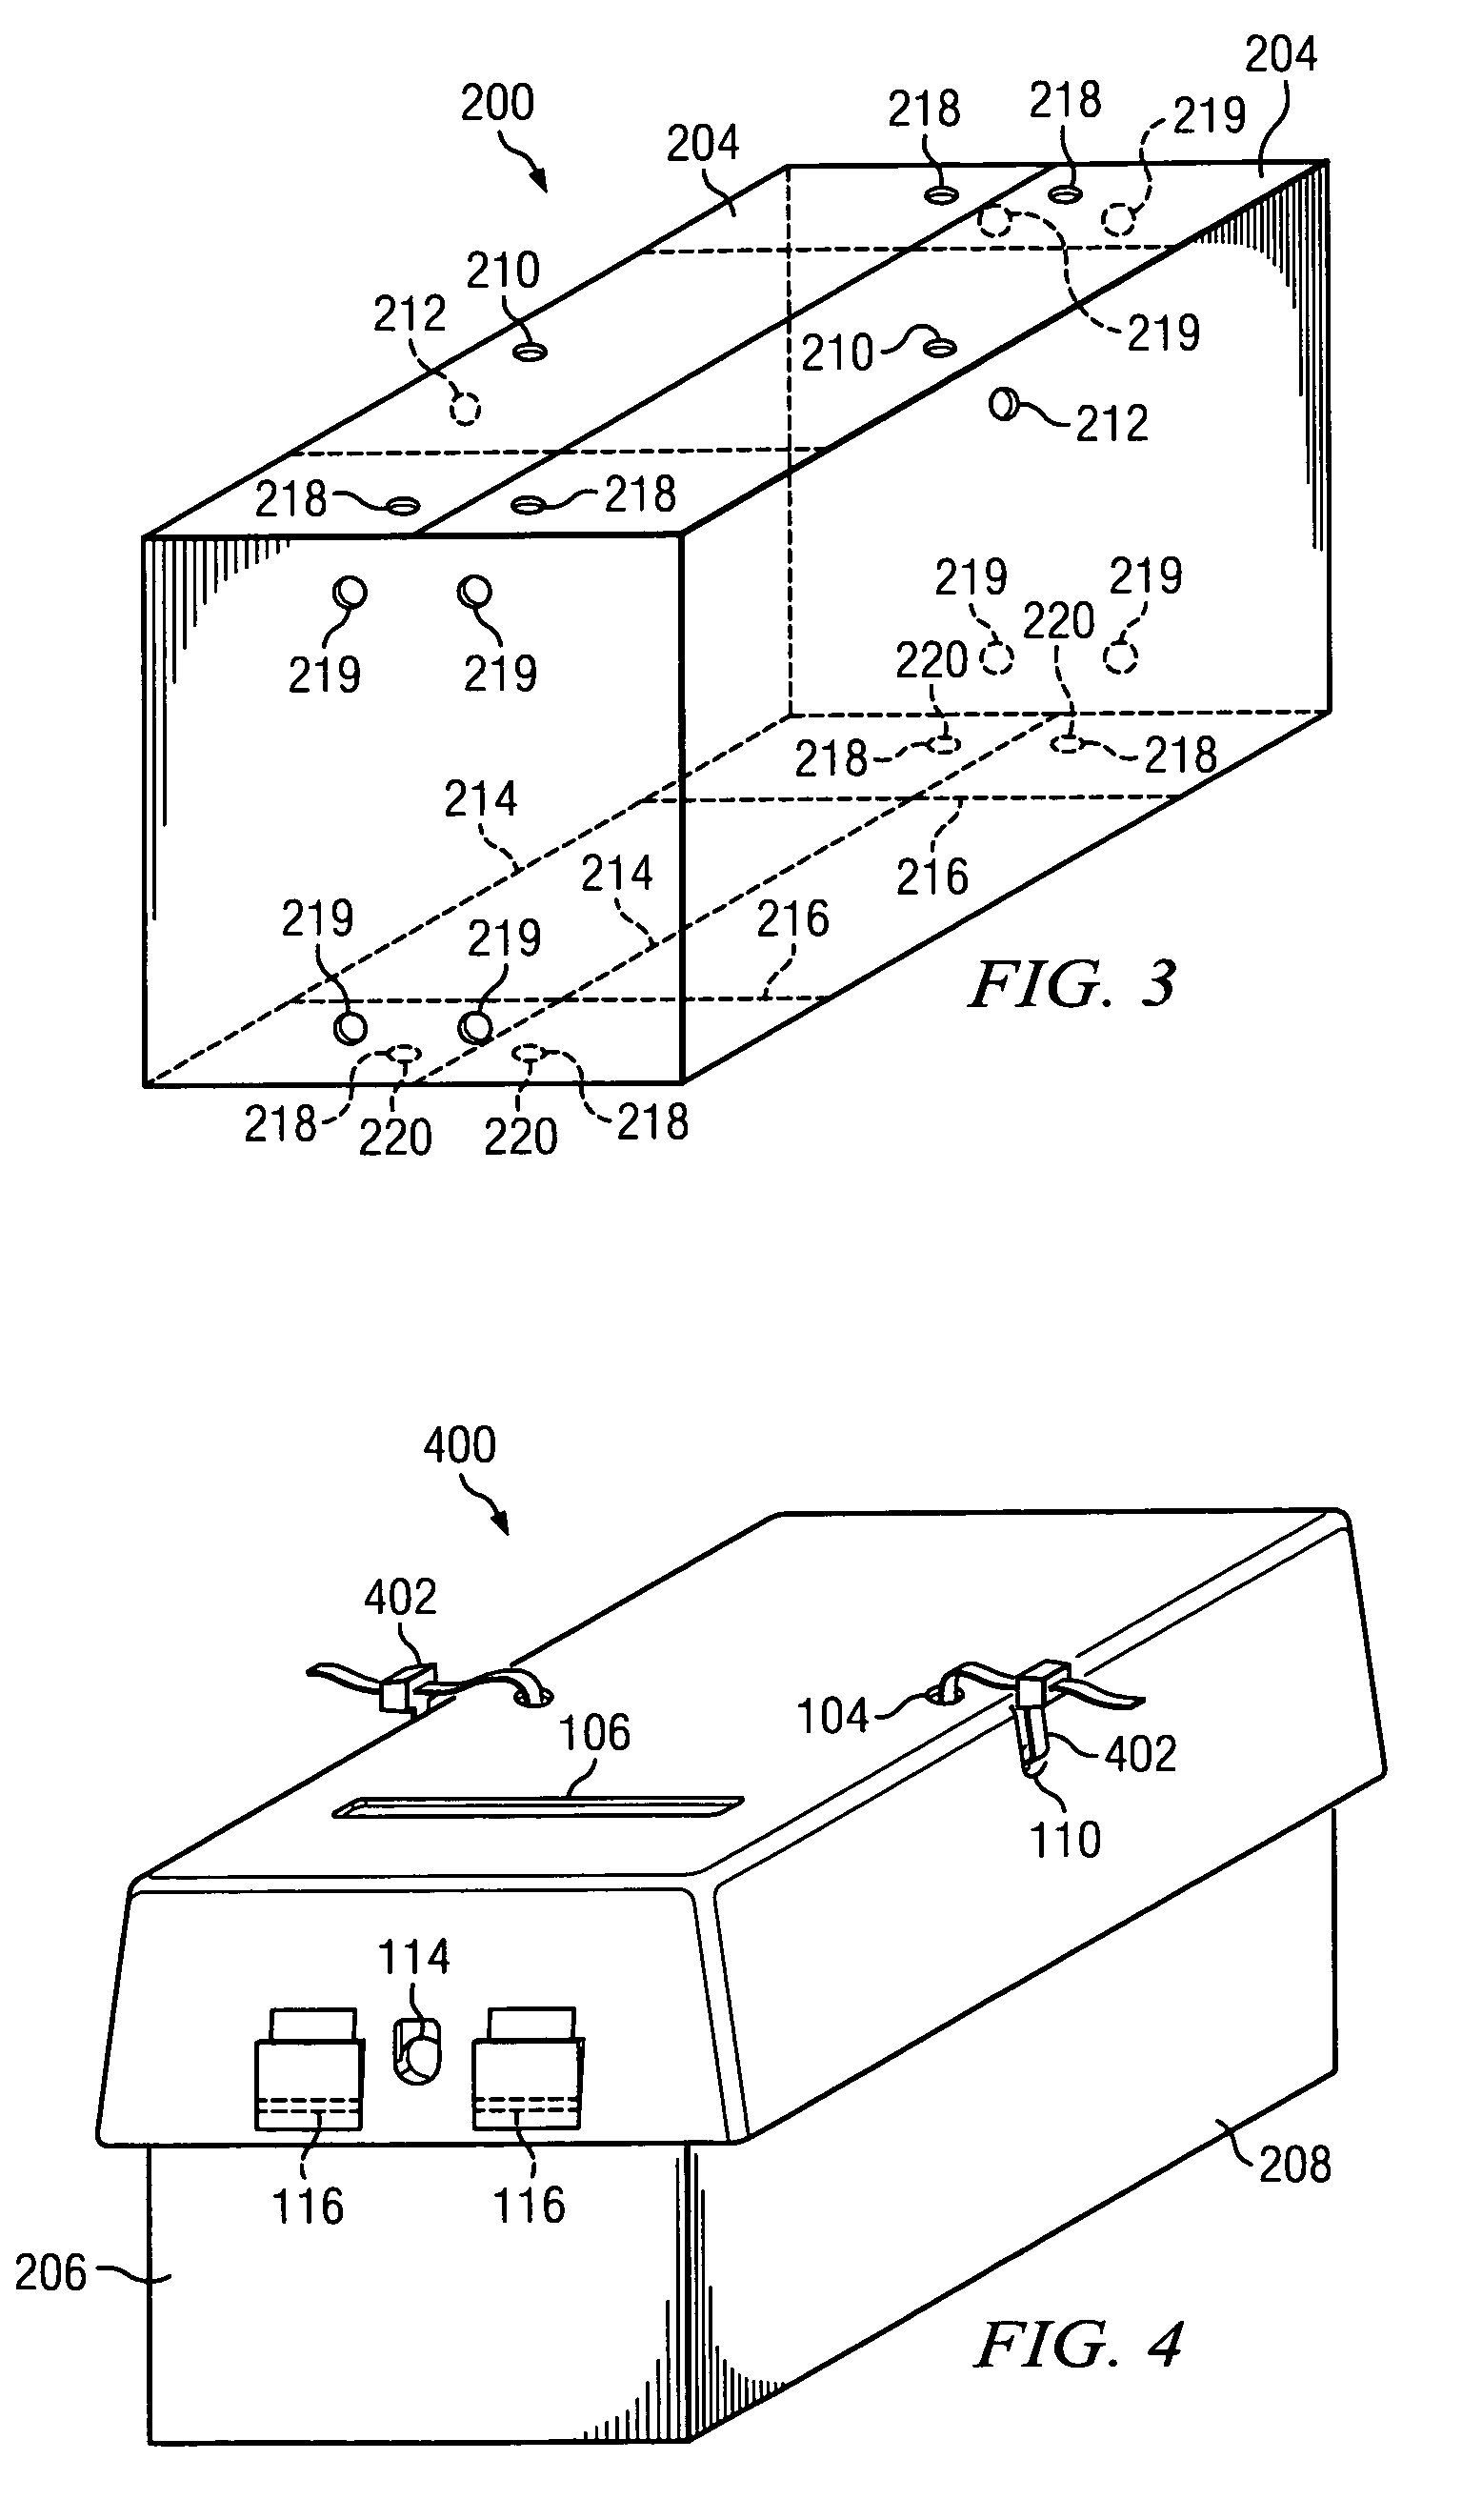 System for secure collection and disposal of large volumes of documents